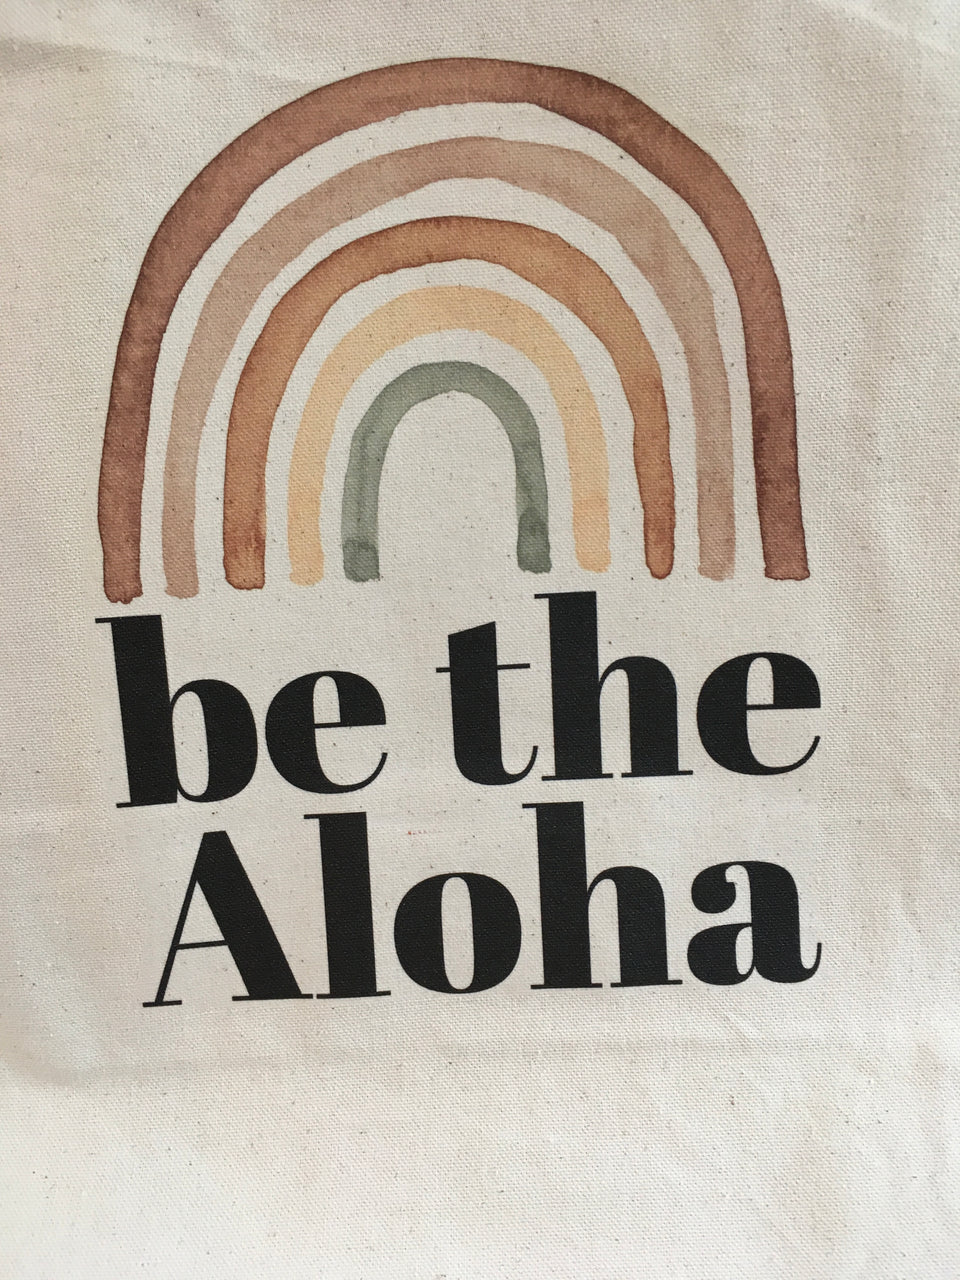 Large canvas bag with earth tone rainbow and be the aloha written in black font.